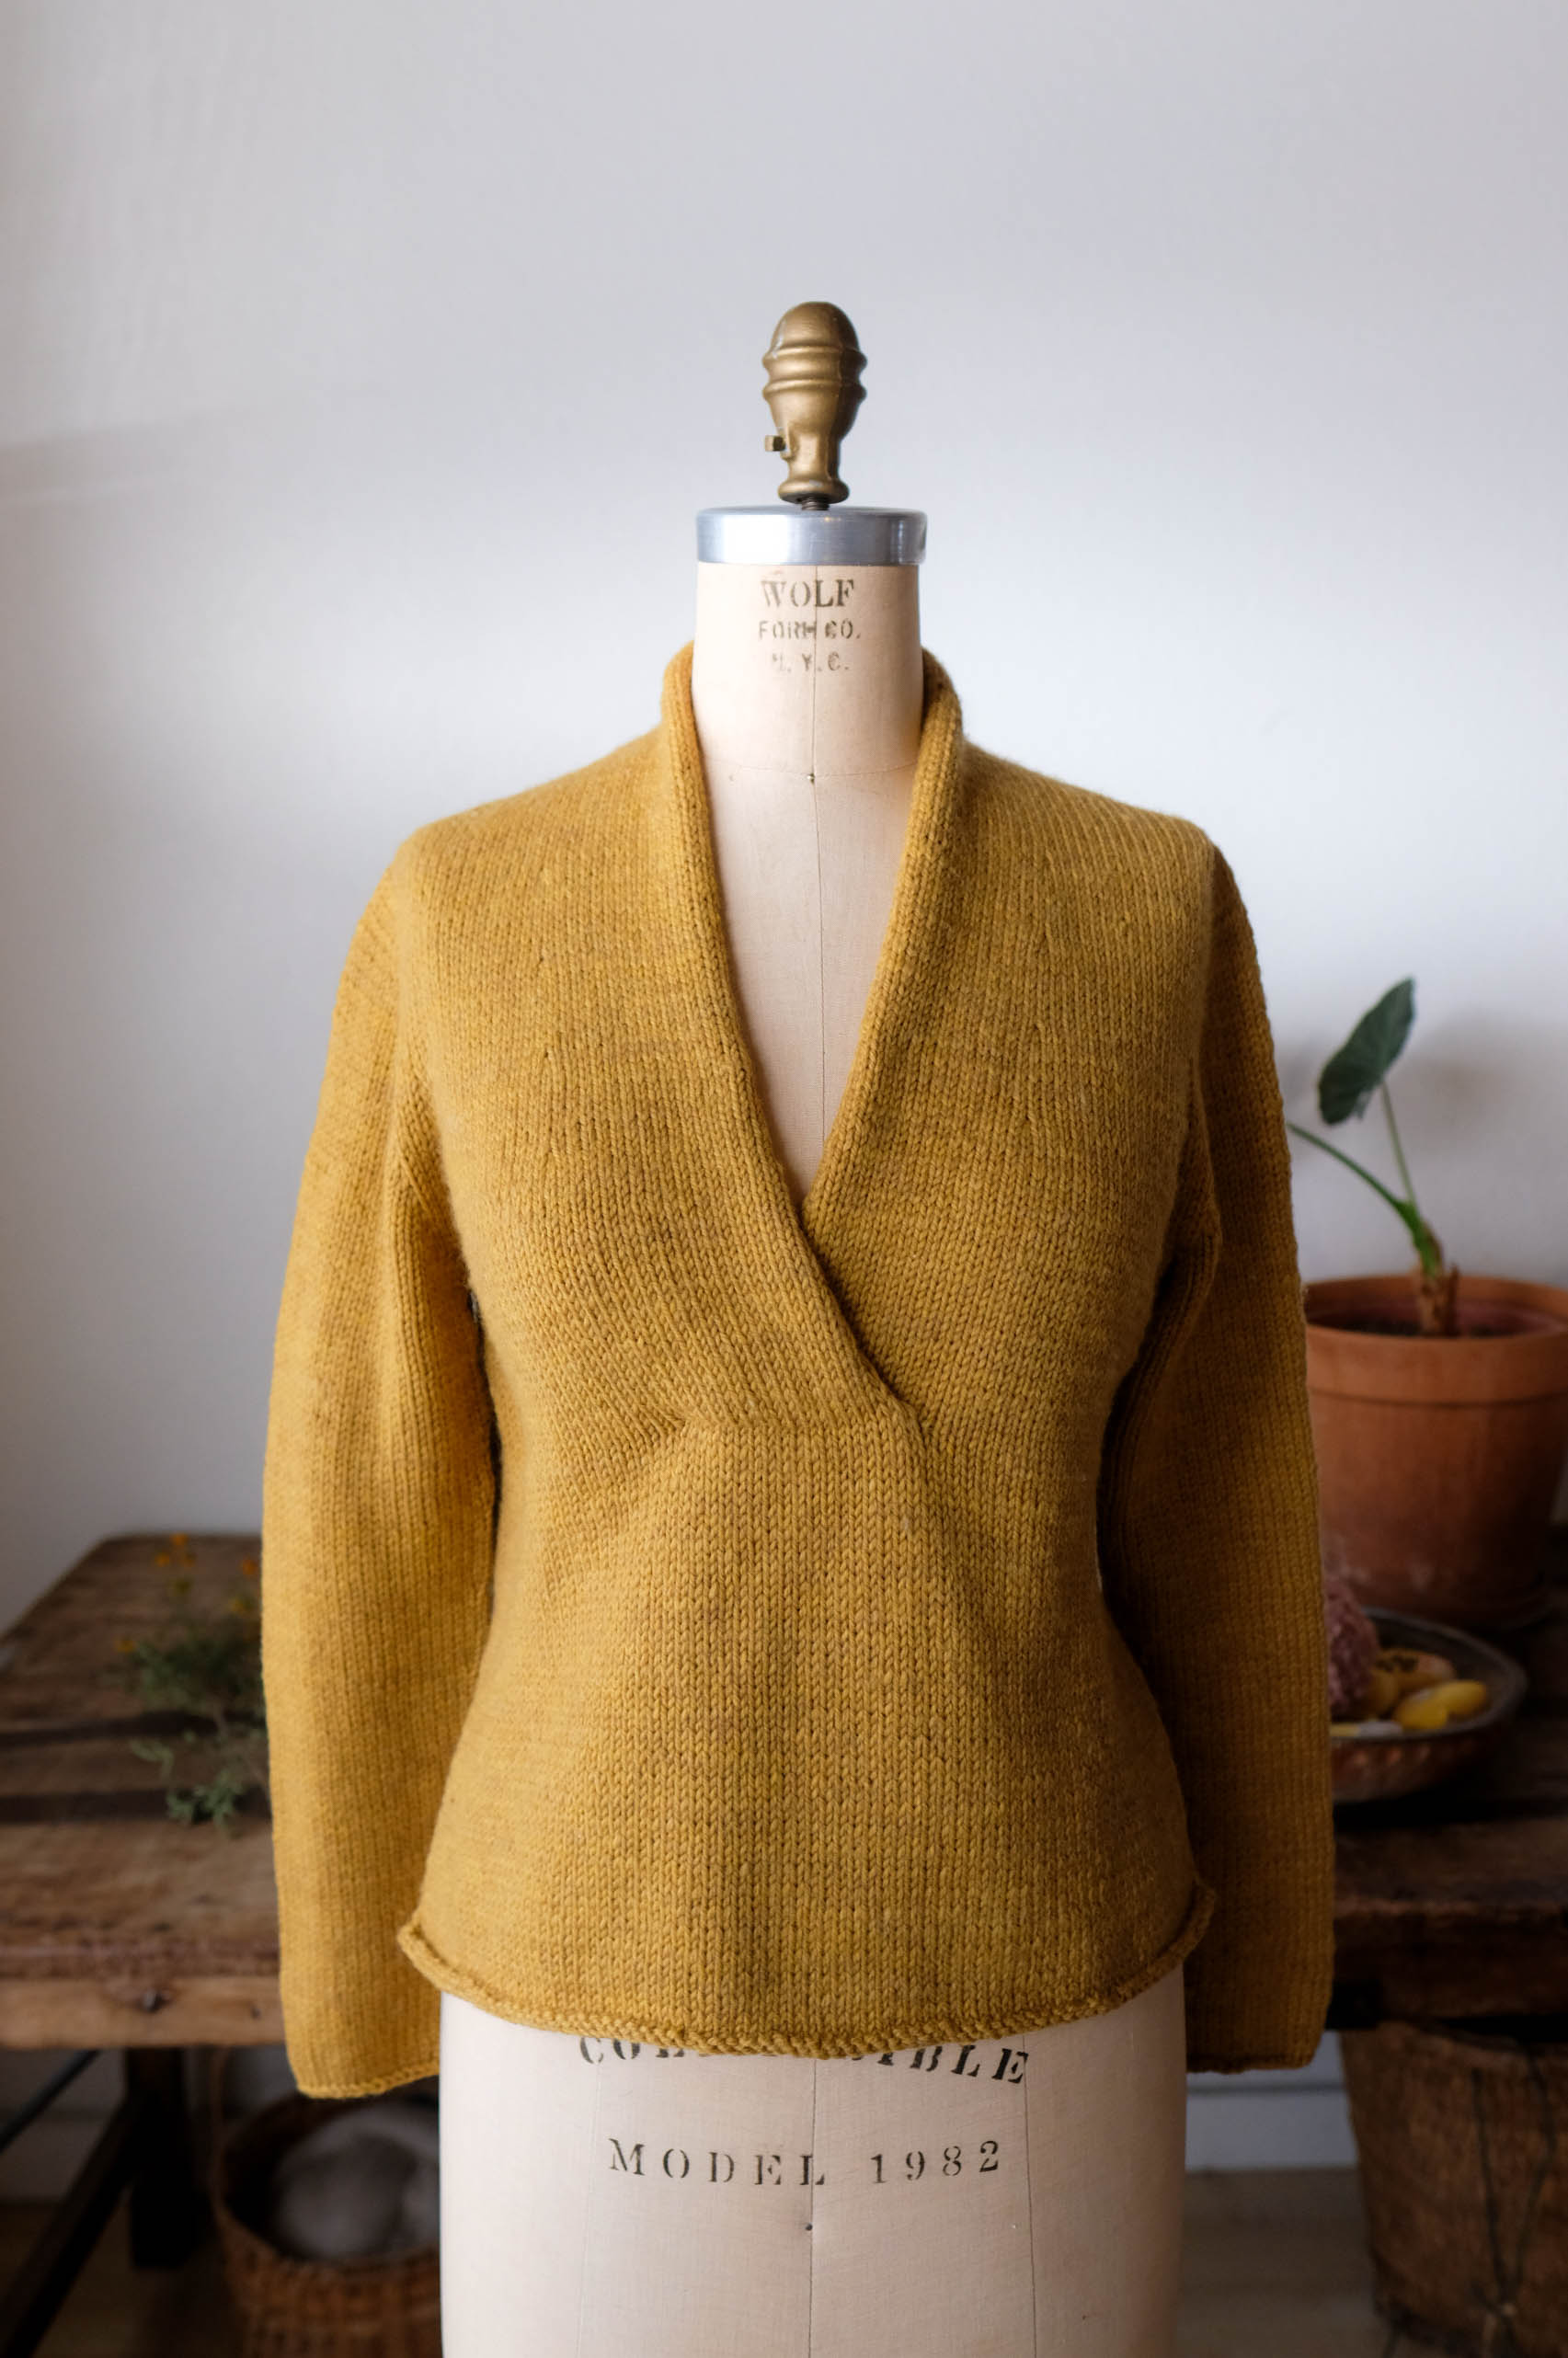 Cocoknits Sweater Workshop: Jump Start! Friday, March 22